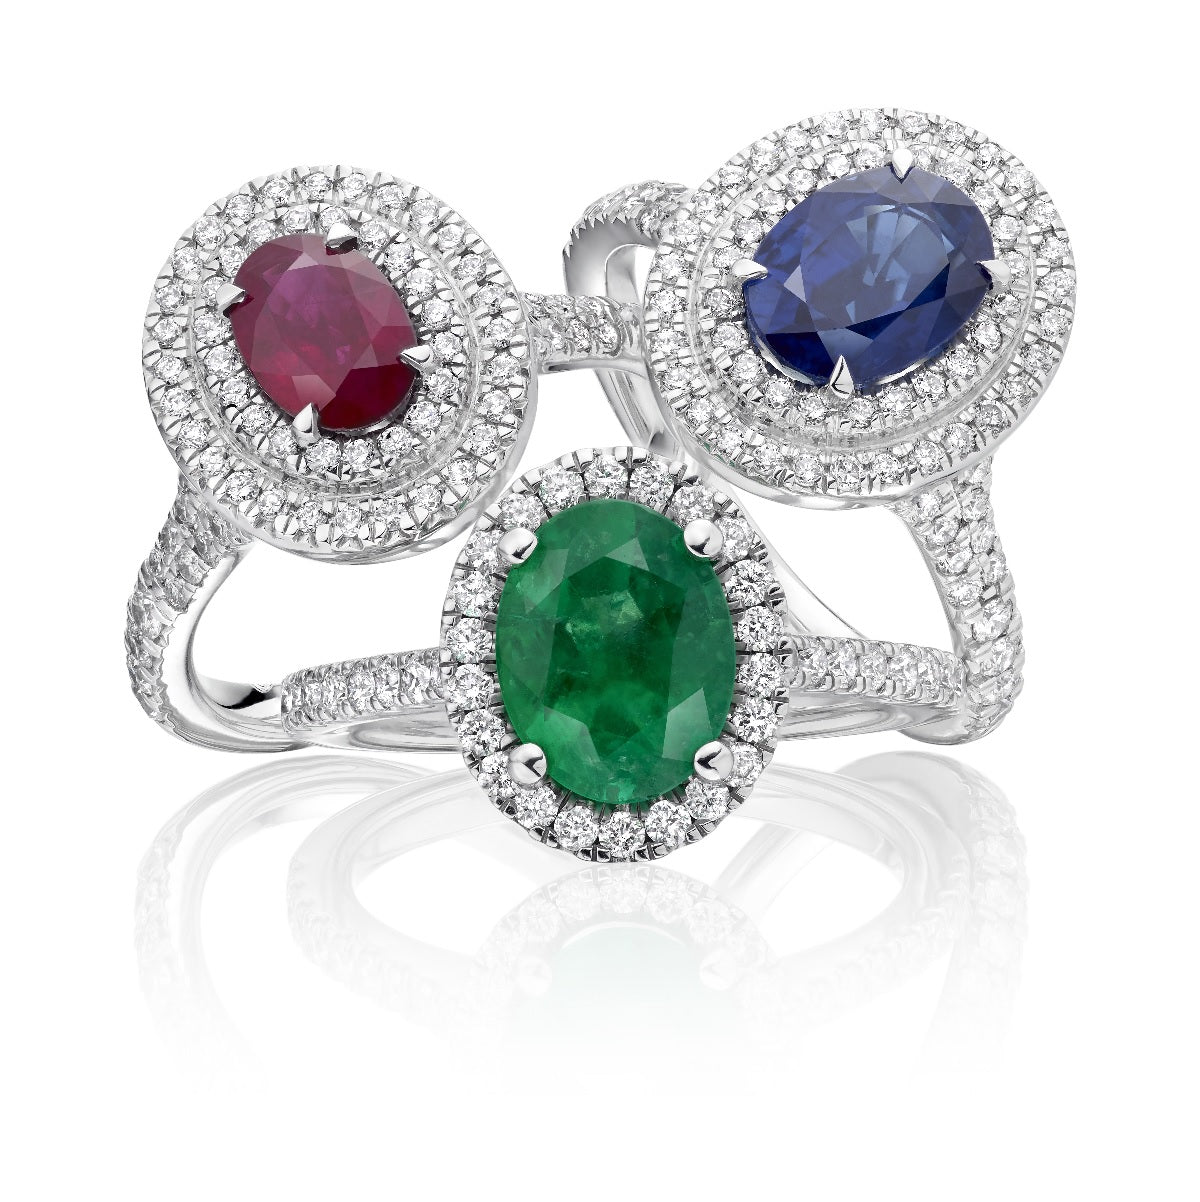 Coloured Stone Engagement Rings Are Rings With A Gemstone Such As Sapphire, Ruby or Emerald or morganite As The Centre Stone